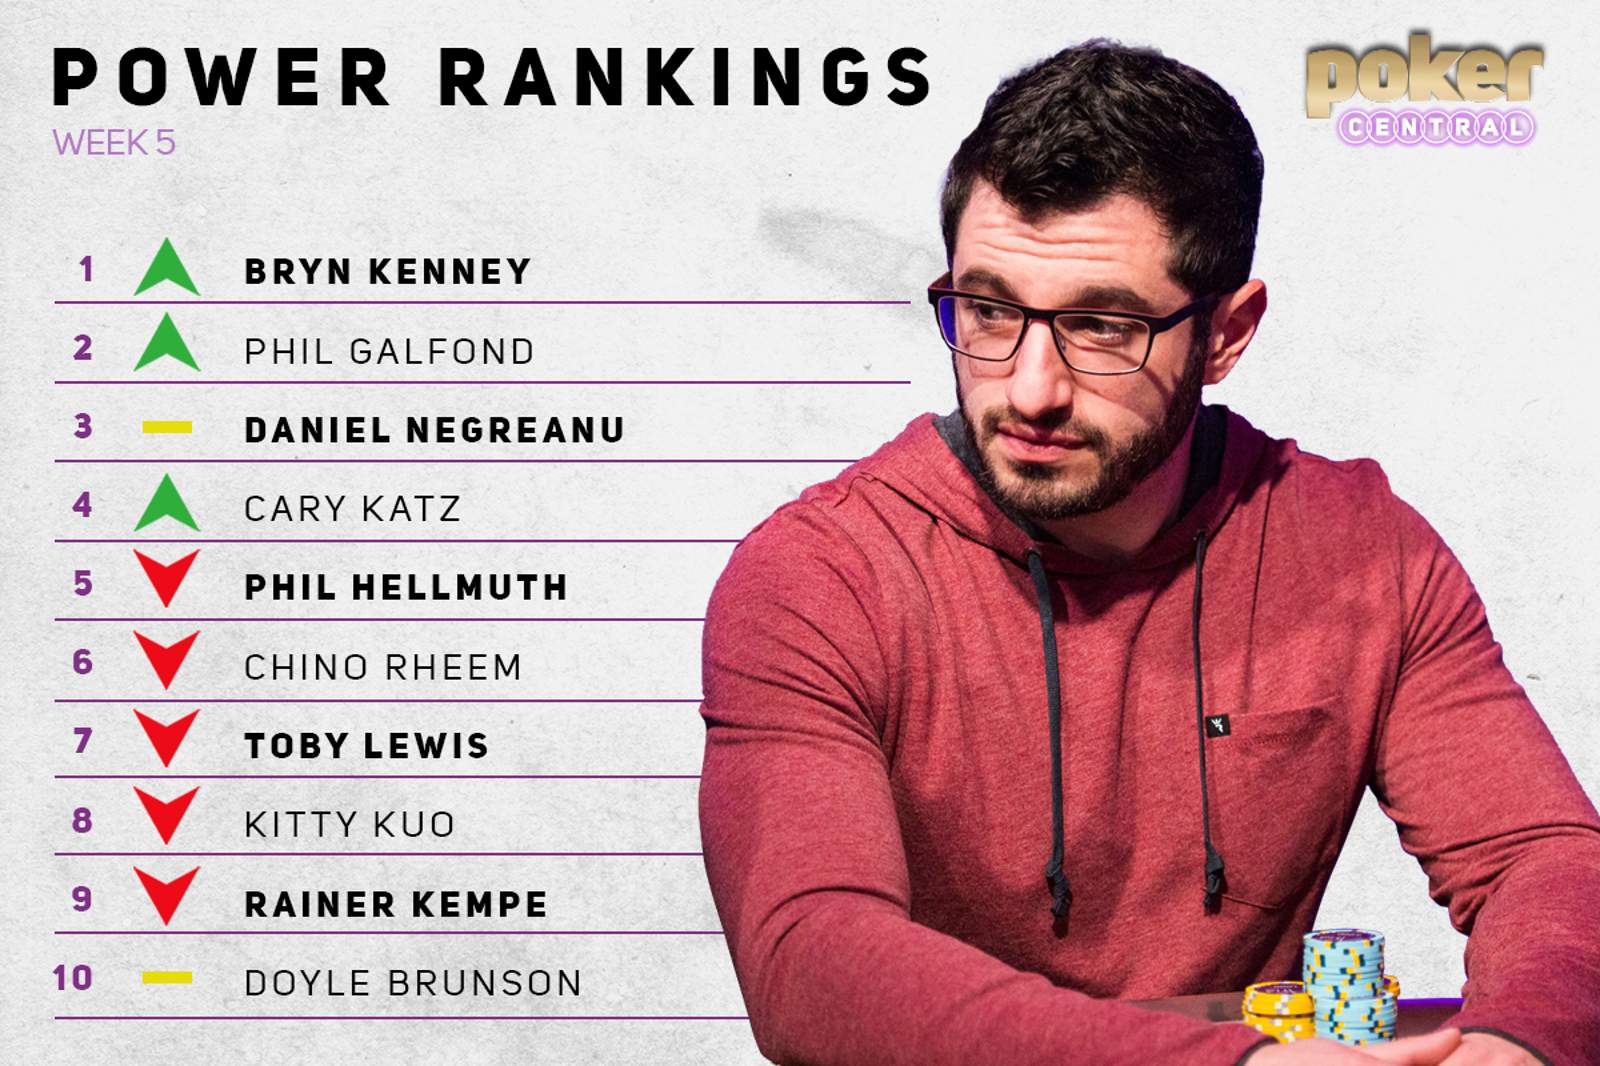 Poker Central Power Rankings: Kenney & Galfond Vault to The Top